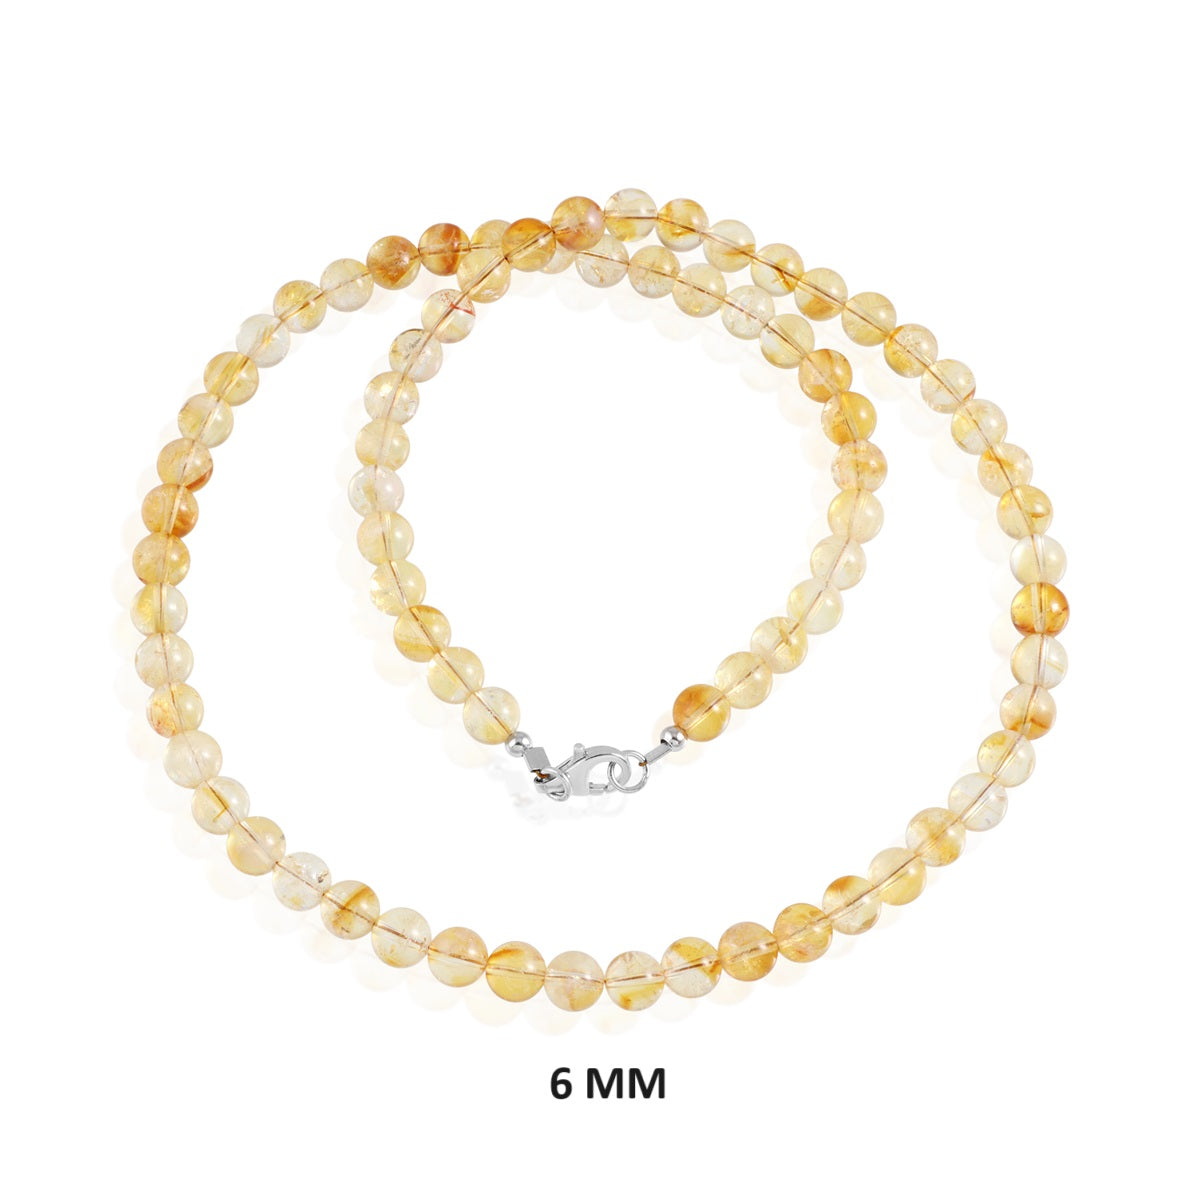 Citrine Beads Silver Necklace: Elegance and Prosperity Combined